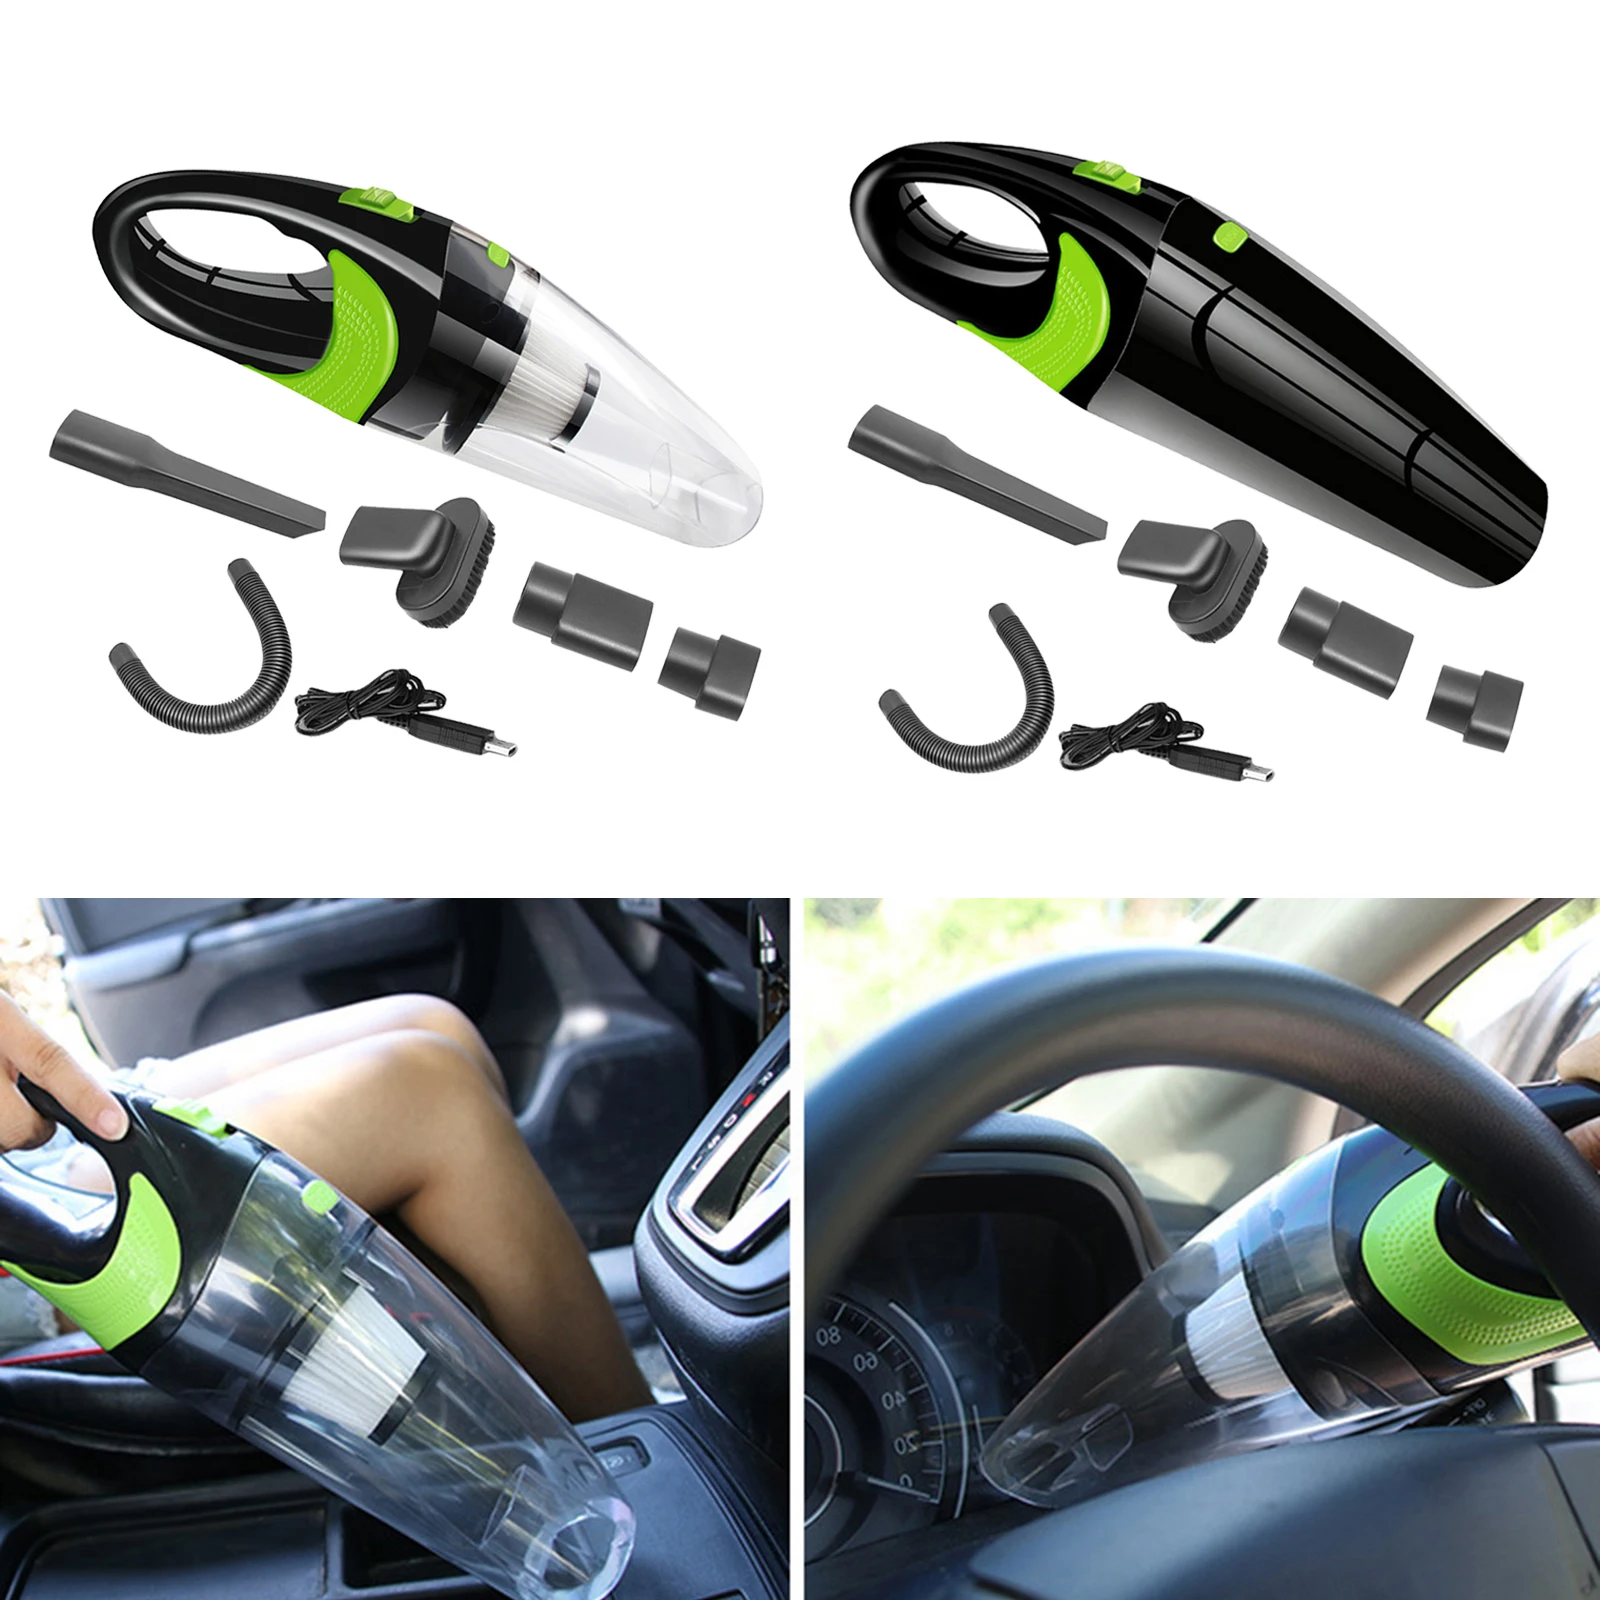 Handheld Car Vacuum 4000PA Rechargeable Wet/Dry for Car Auto Pet Cleaning